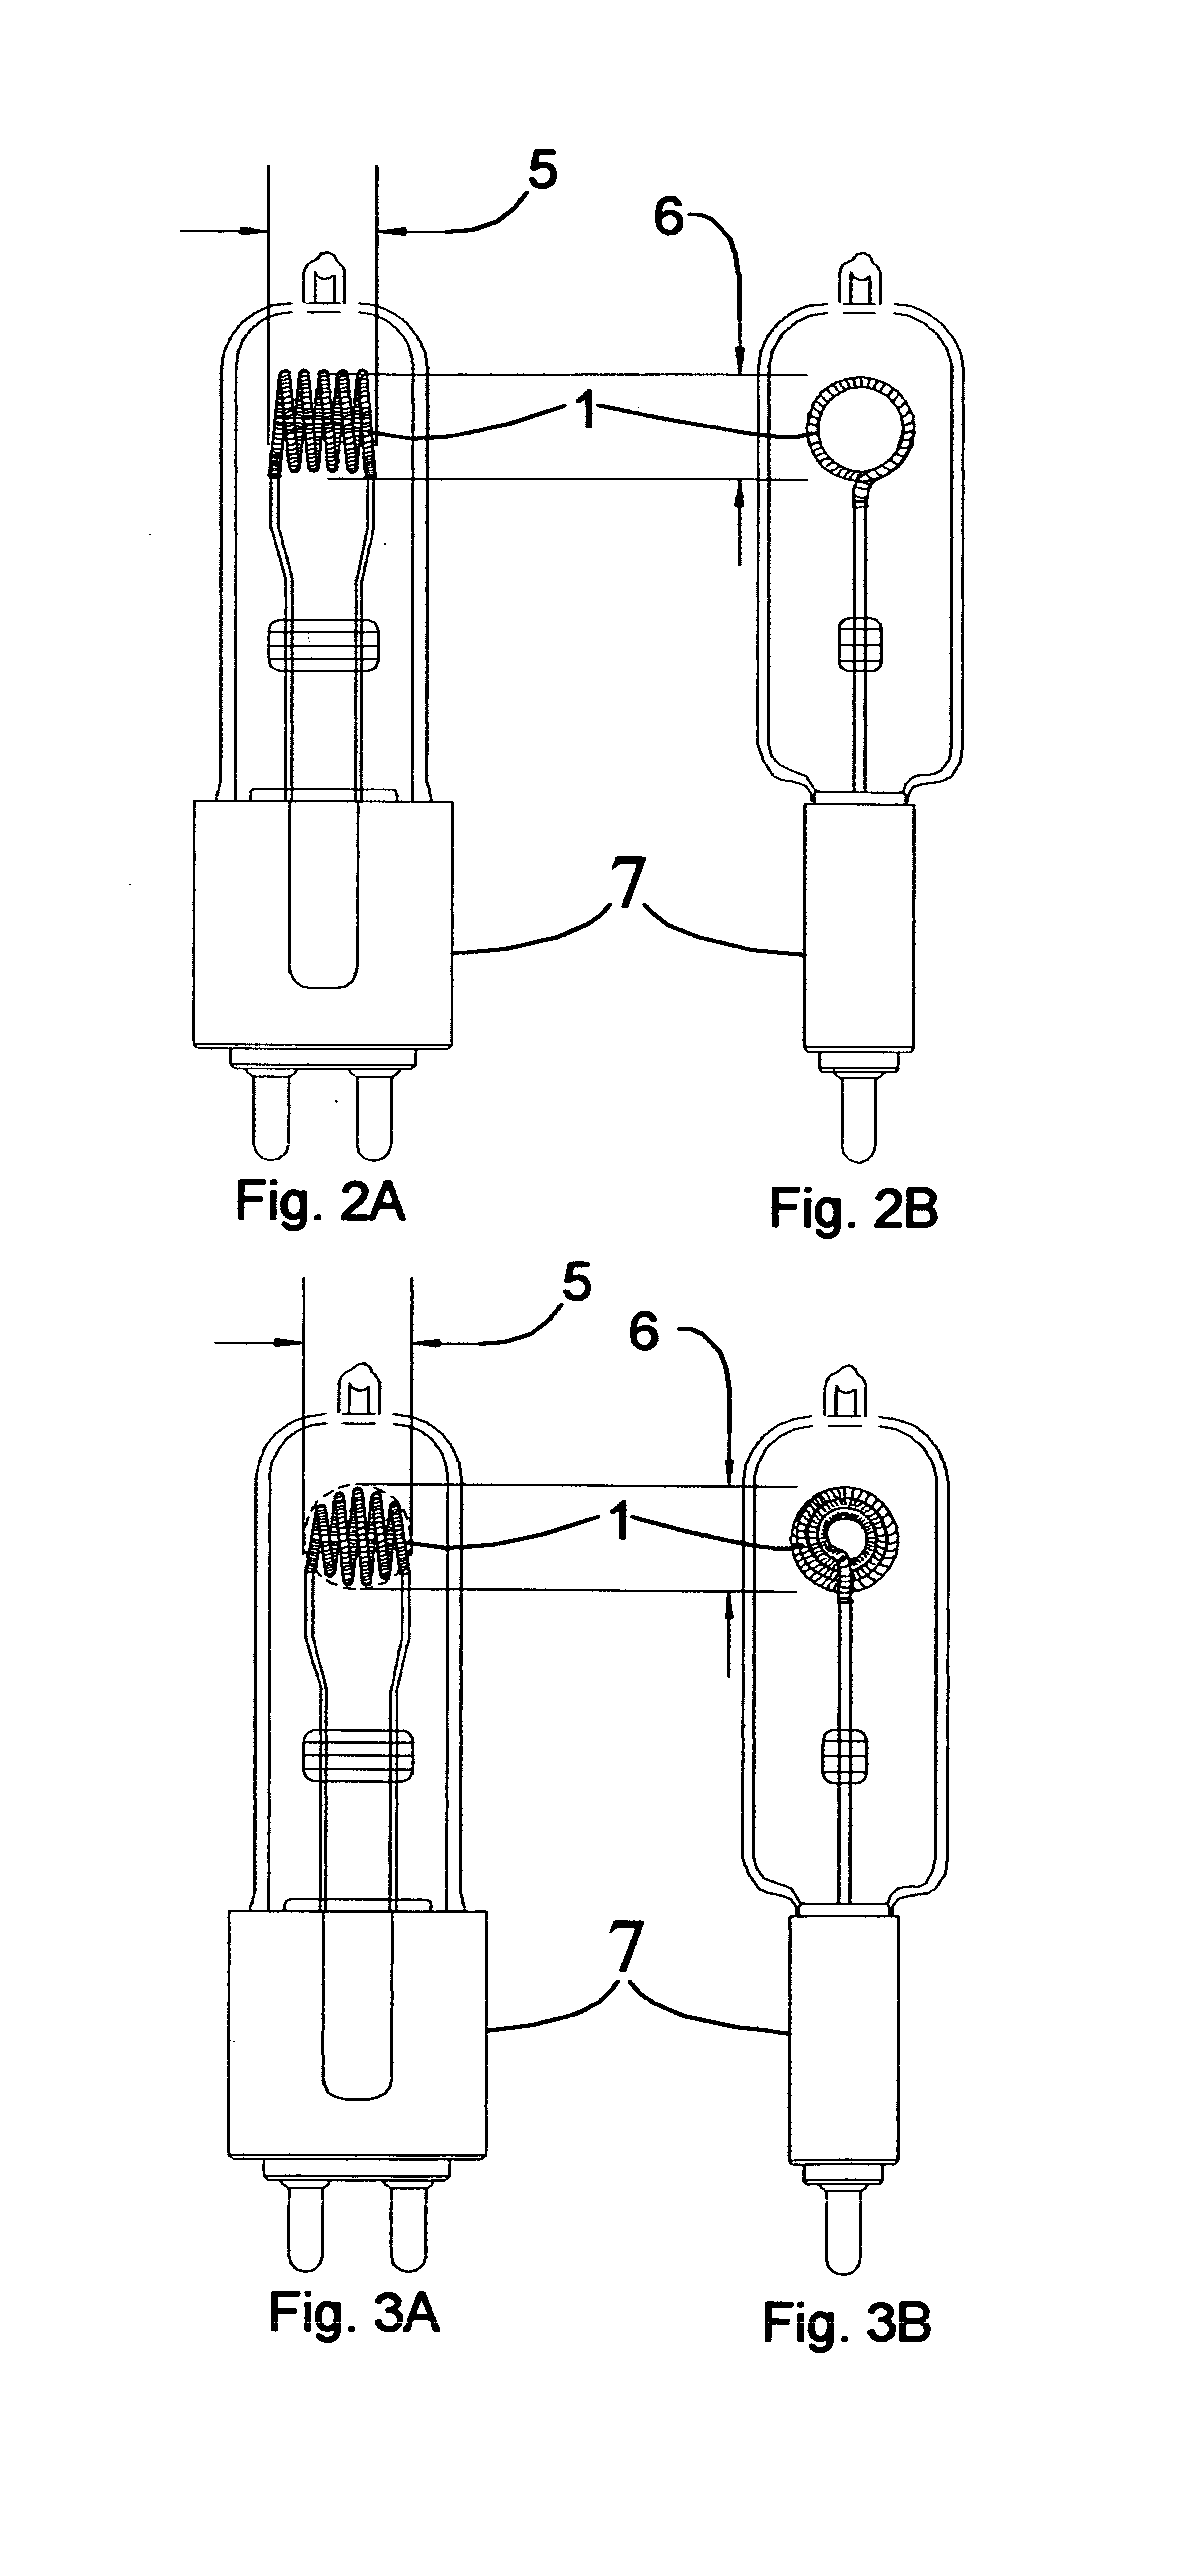 Incandescent lamp and illumination system with optimized filament shape and size